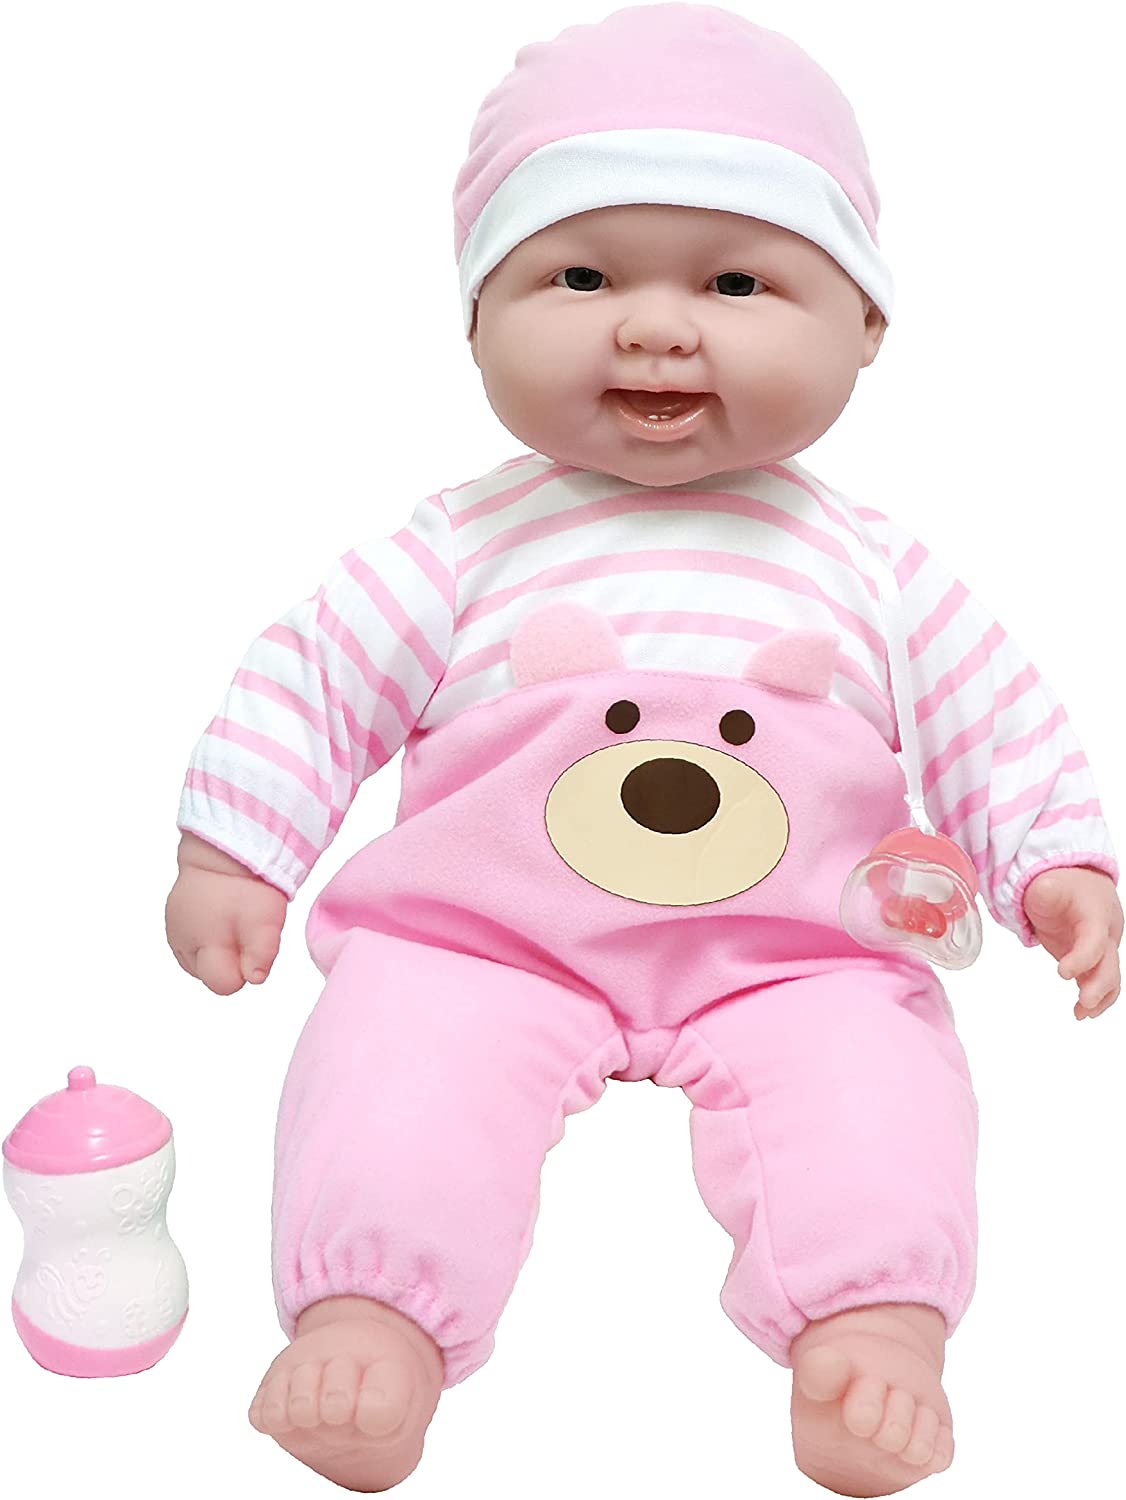 Best toys for 15 month old babies: JC Toys baby doll